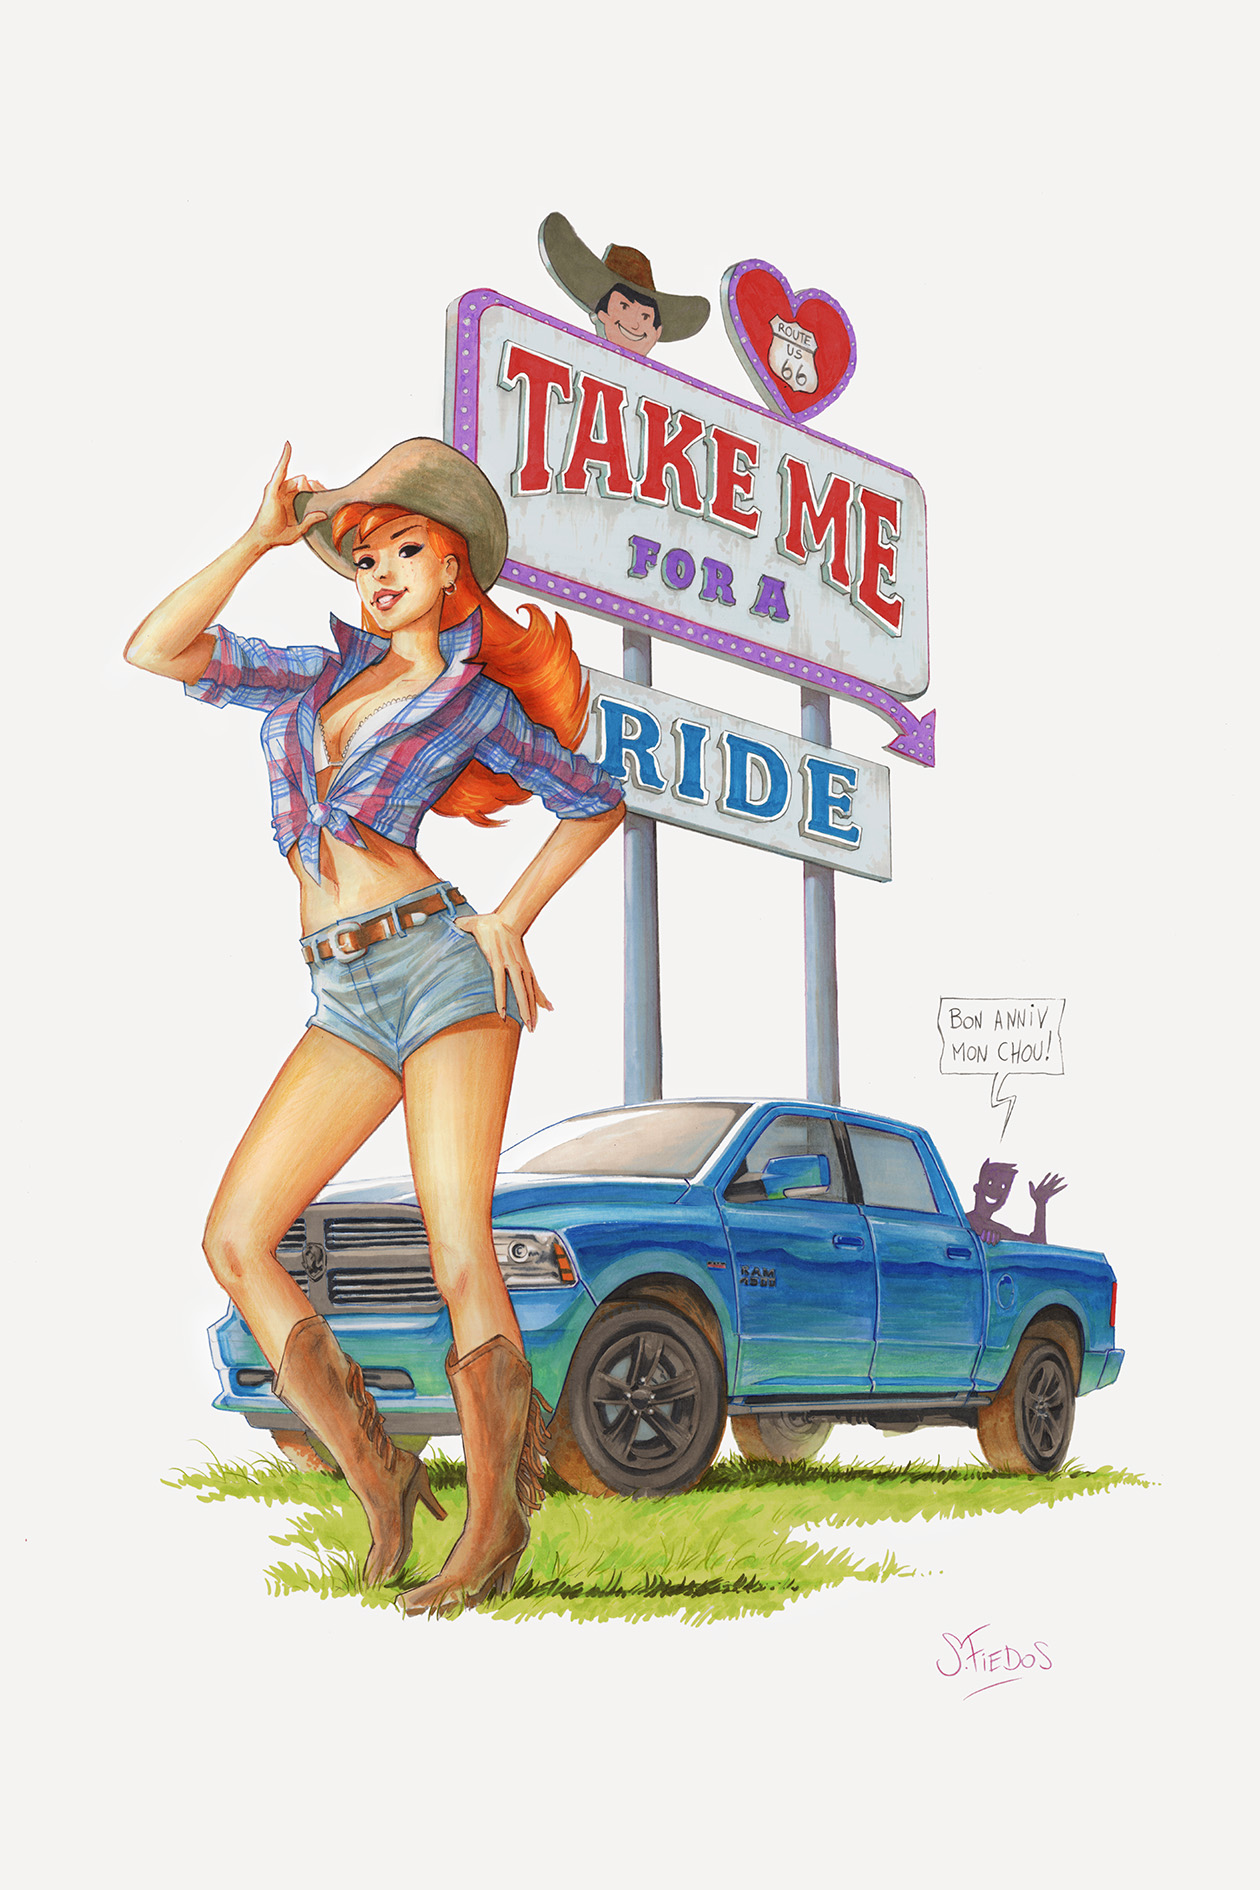 The Cowgirl and the Dodge Ram